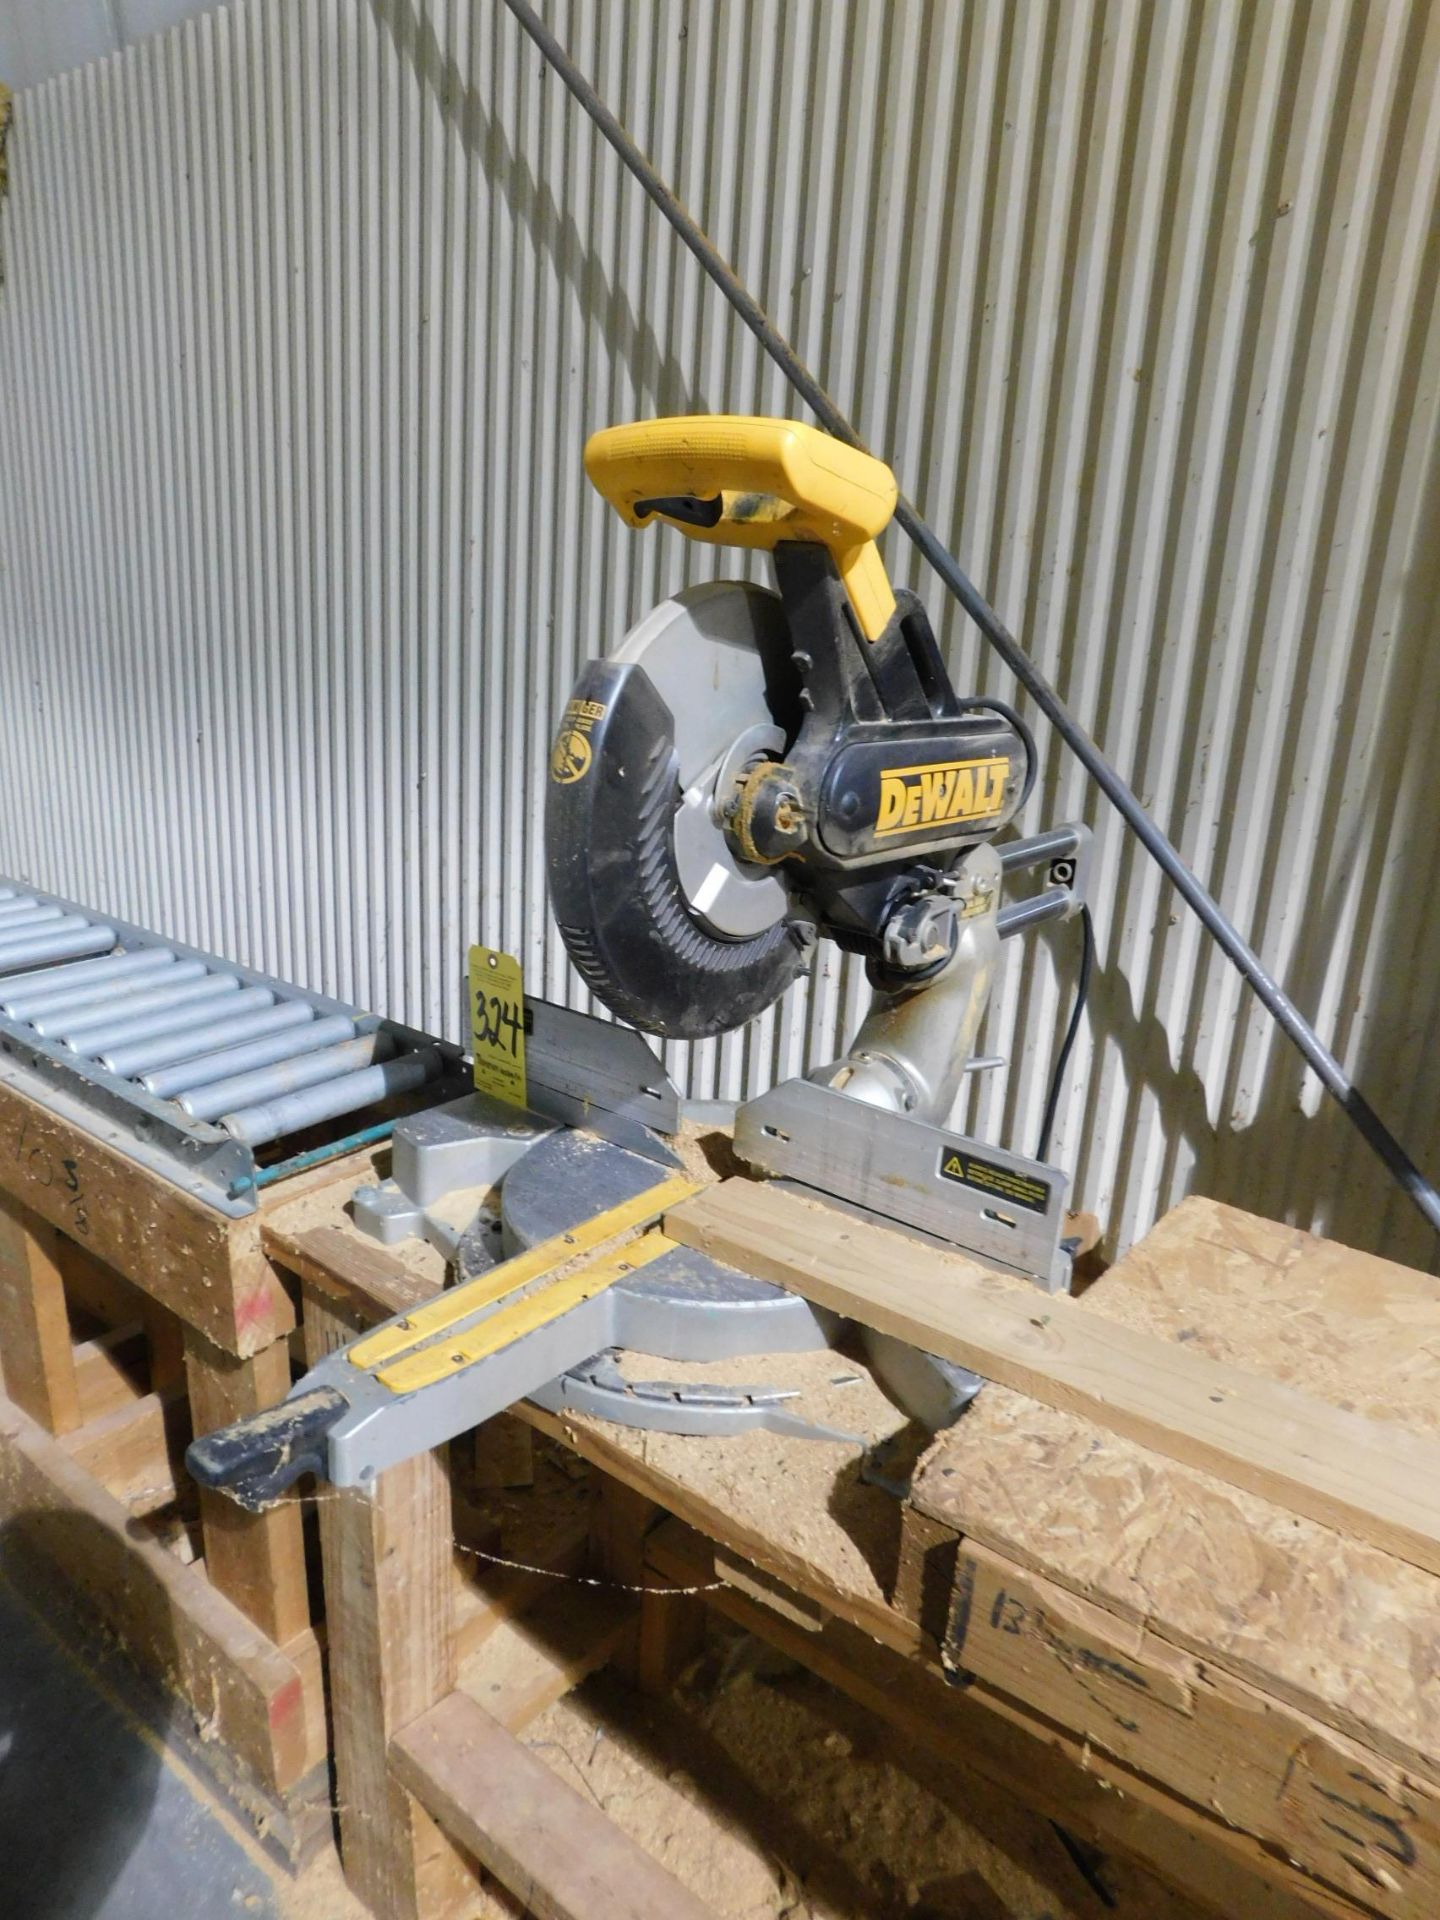 Dewalt DW708, 12" Sliding Compound Miter Saw, with Table and Infeed Conveyor